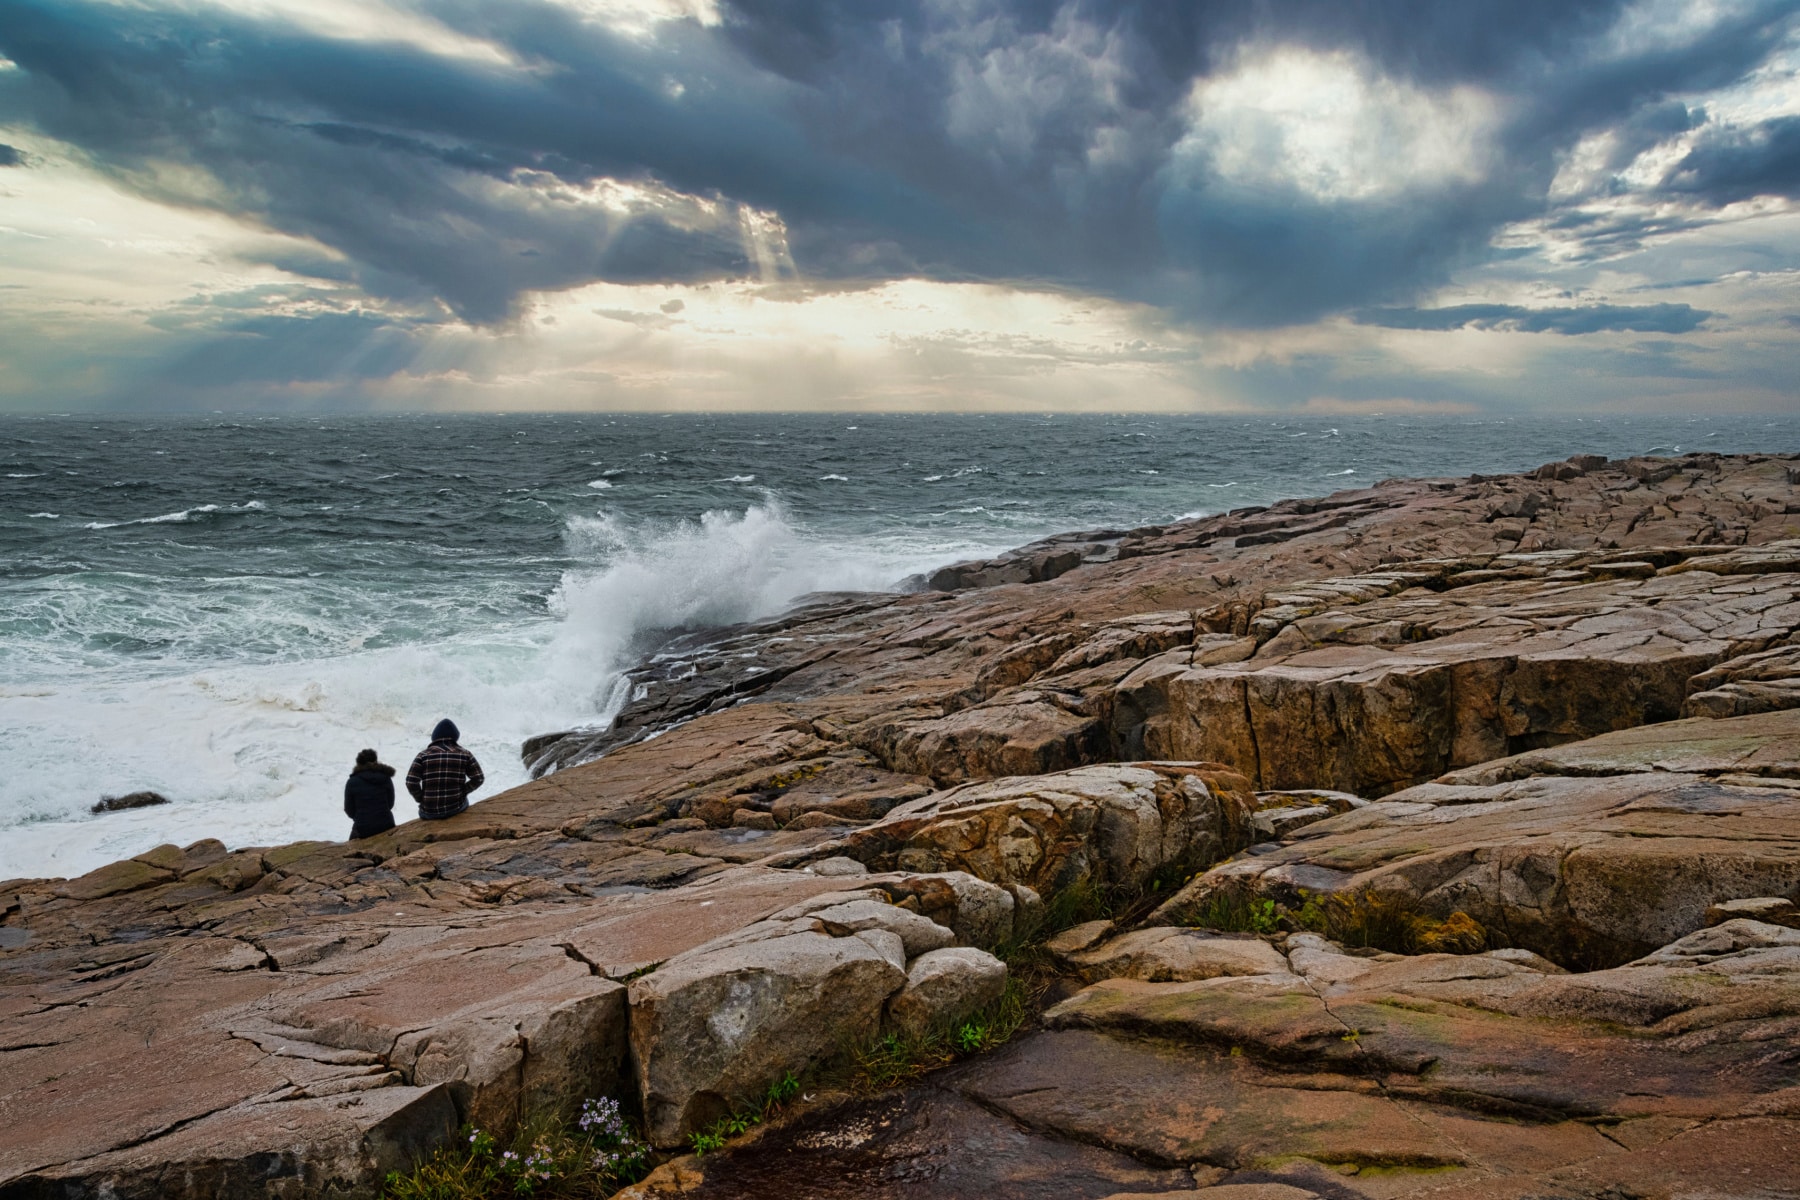 Two people sit on a rocky outcropping watching waves crash under stormy skies.